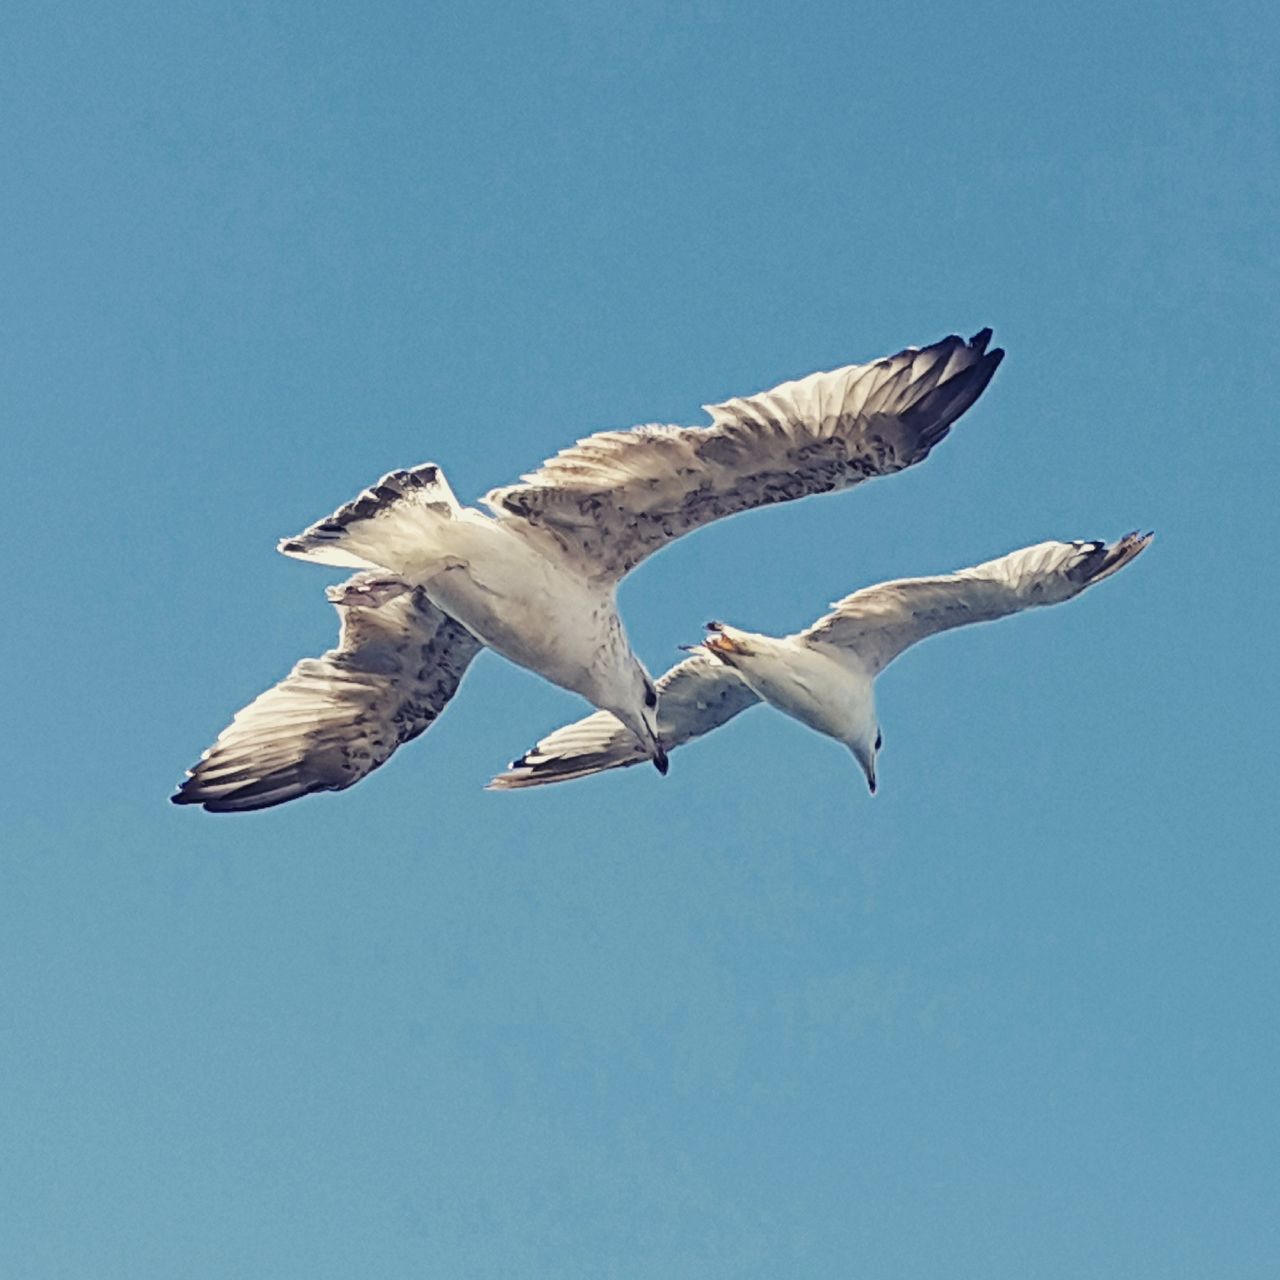 flying, bird, animal themes, animals in the wild, spread wings, copy space, low angle view, animal wildlife, mid-air, clear sky, no people, seagull, day, nature, outdoors, blue, togetherness, sky, close-up, bird of prey